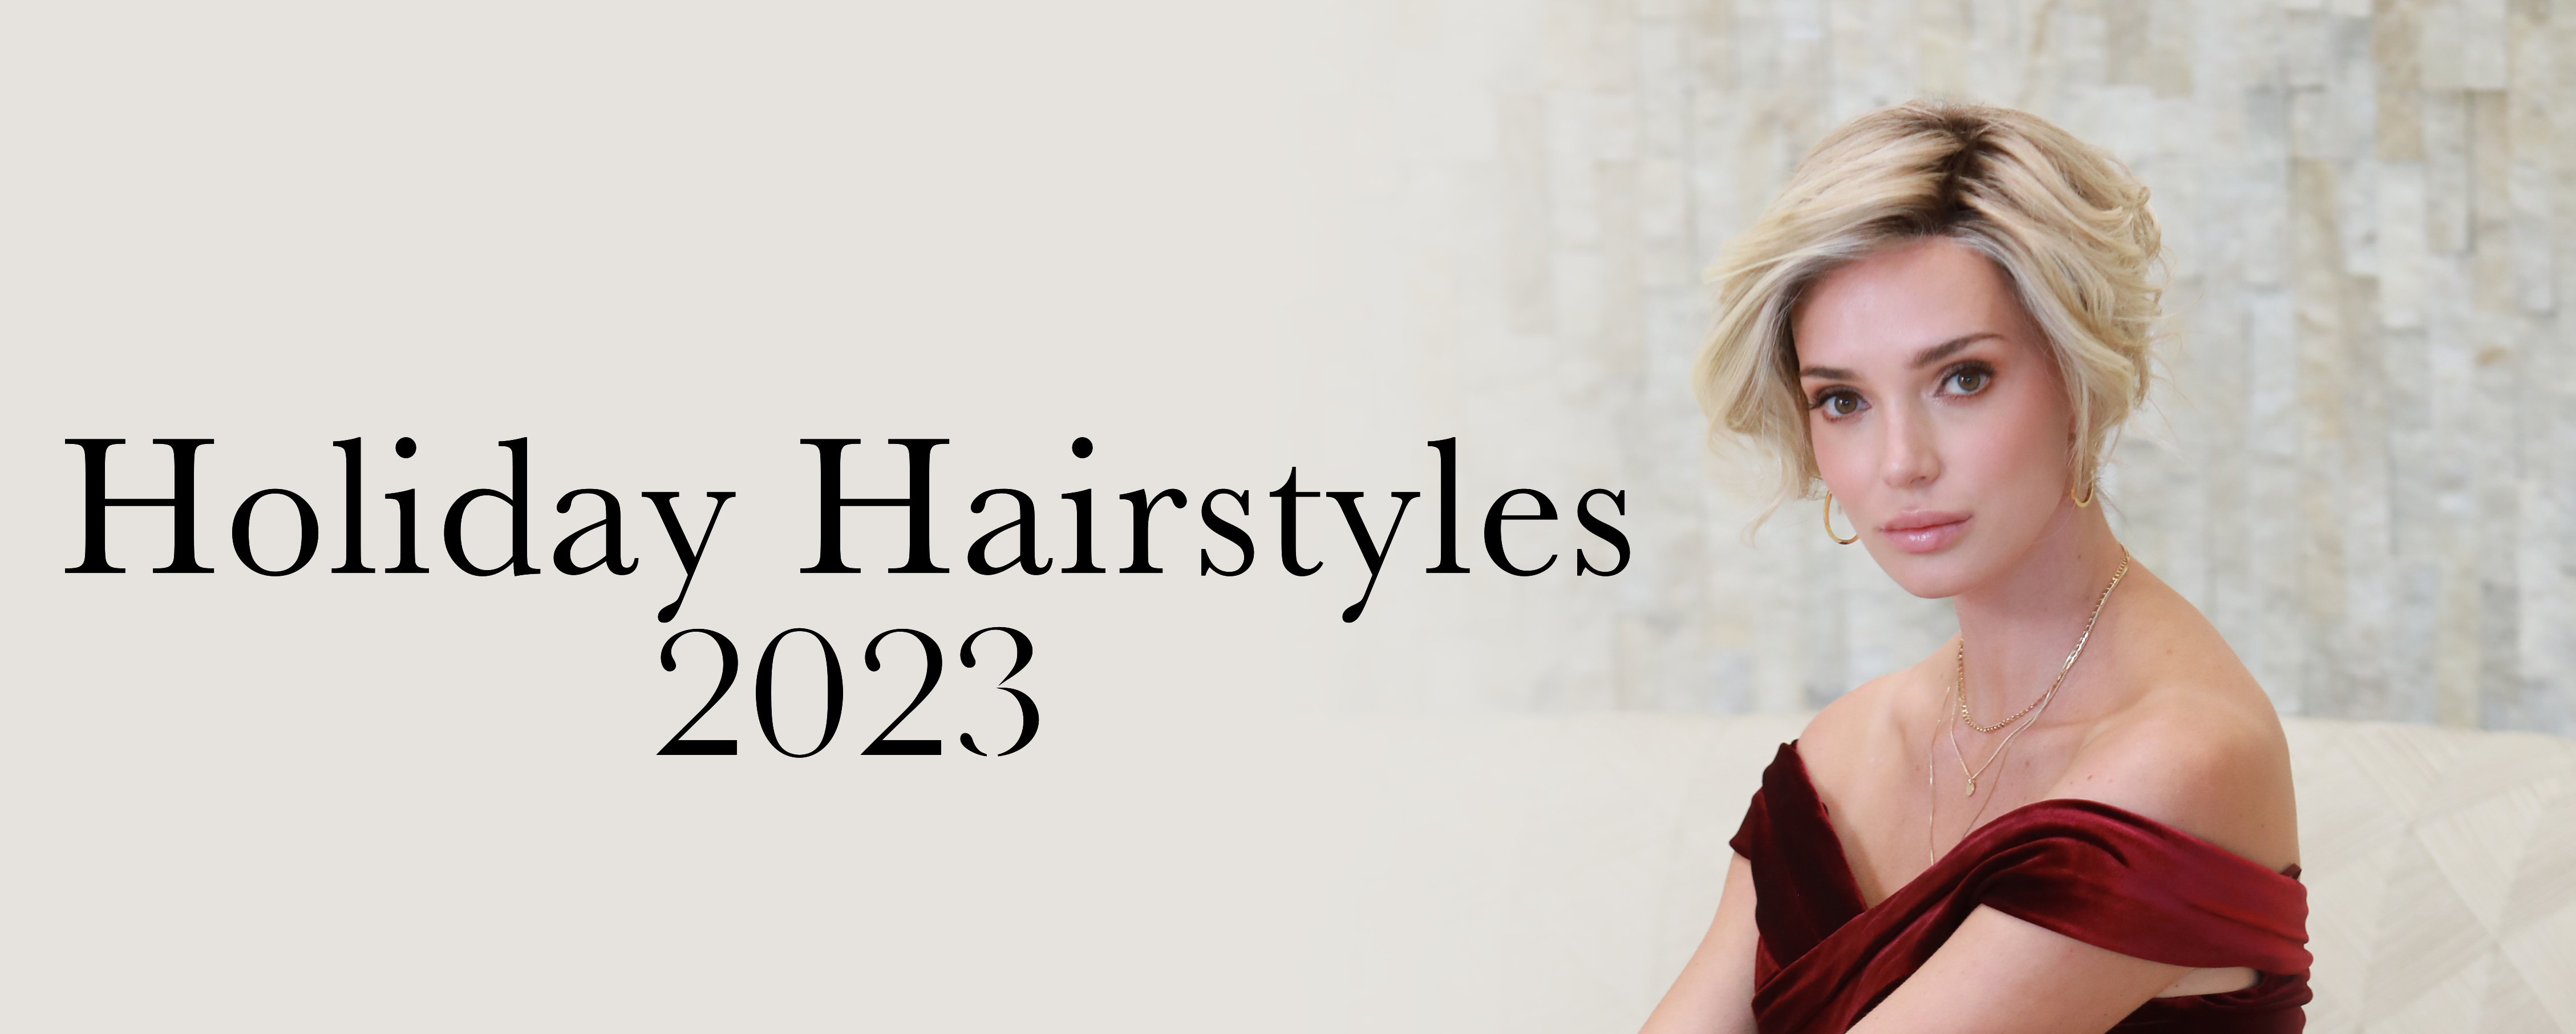 Top 5 Holiday Hairstyles of 2023